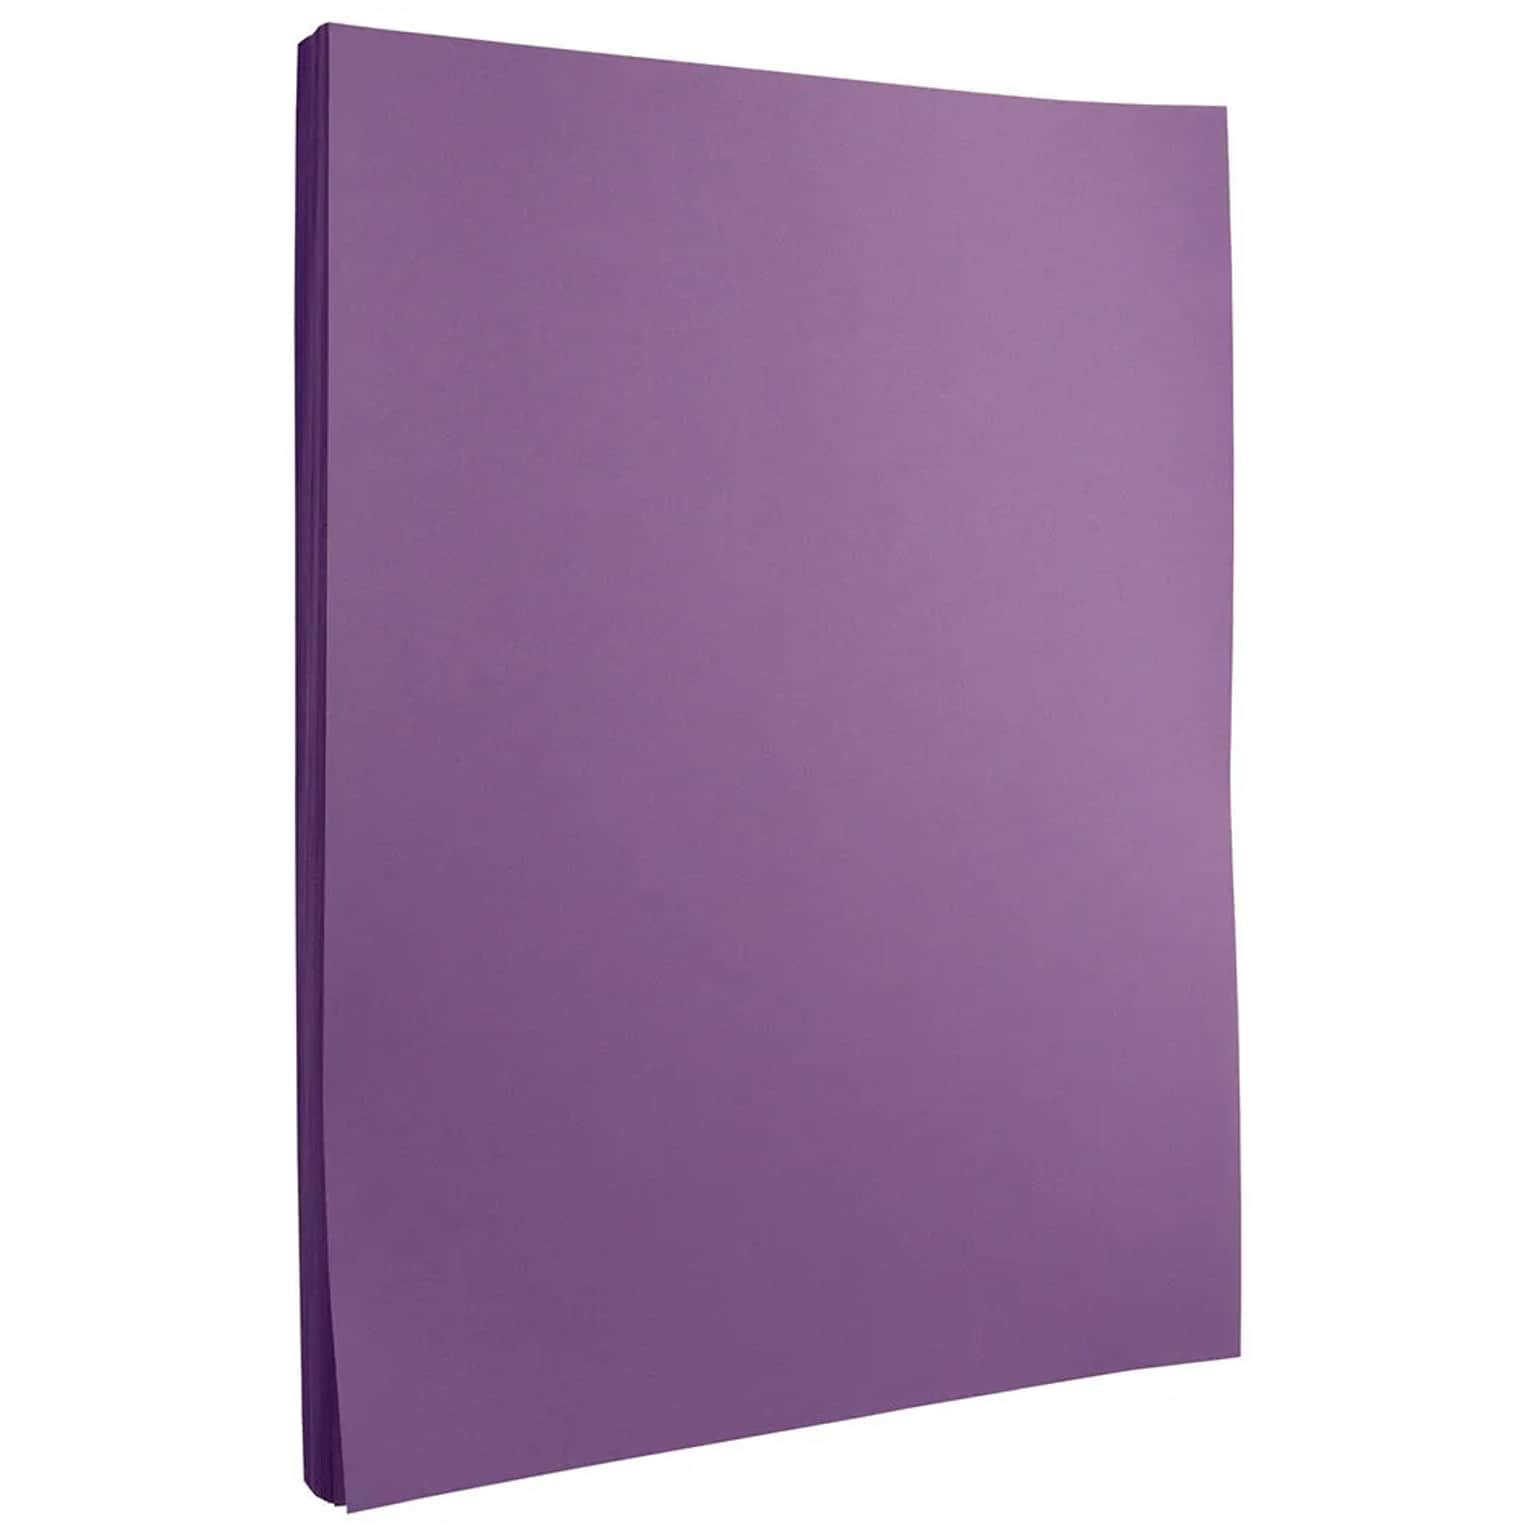 JAM Paper 30% Recycled Smooth Colored Paper, 24 lbs., 8.5 x 11, Violet Purple, 50 Sheets/Pack (102129A)